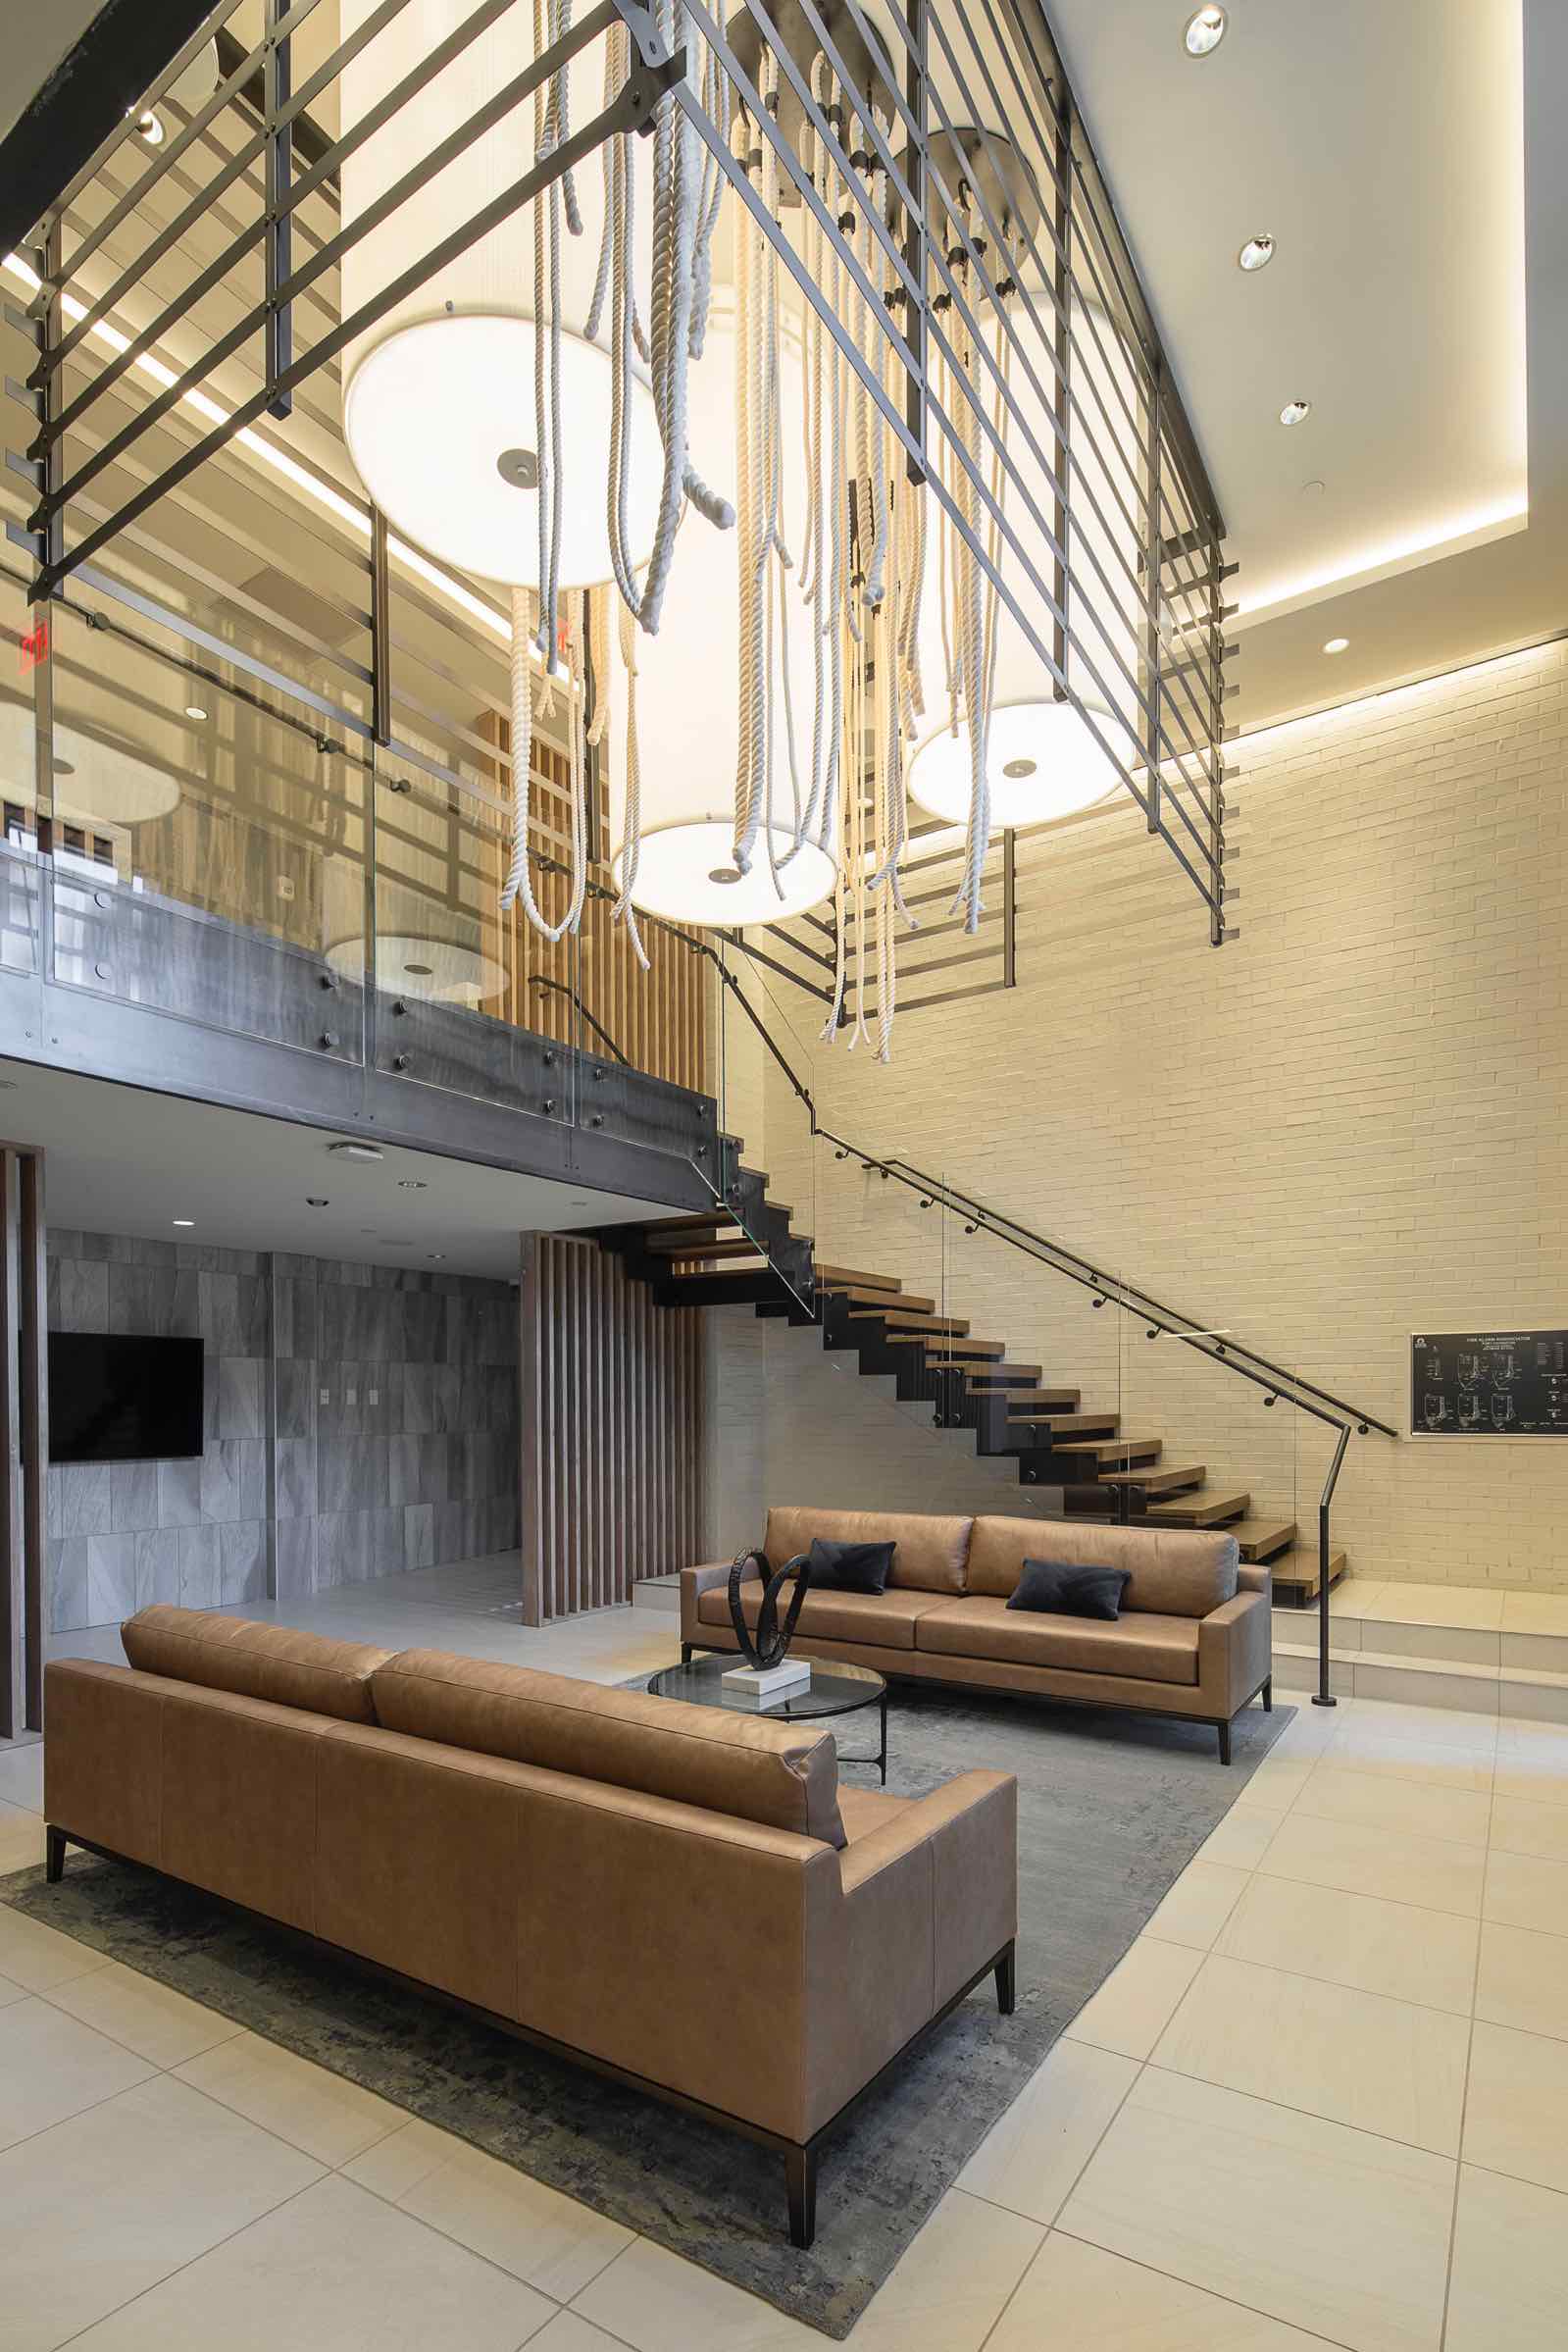 Lobby with a stylish staircase & comfy couches. One of the amenities of 250 Mission in Baltimore, MD.